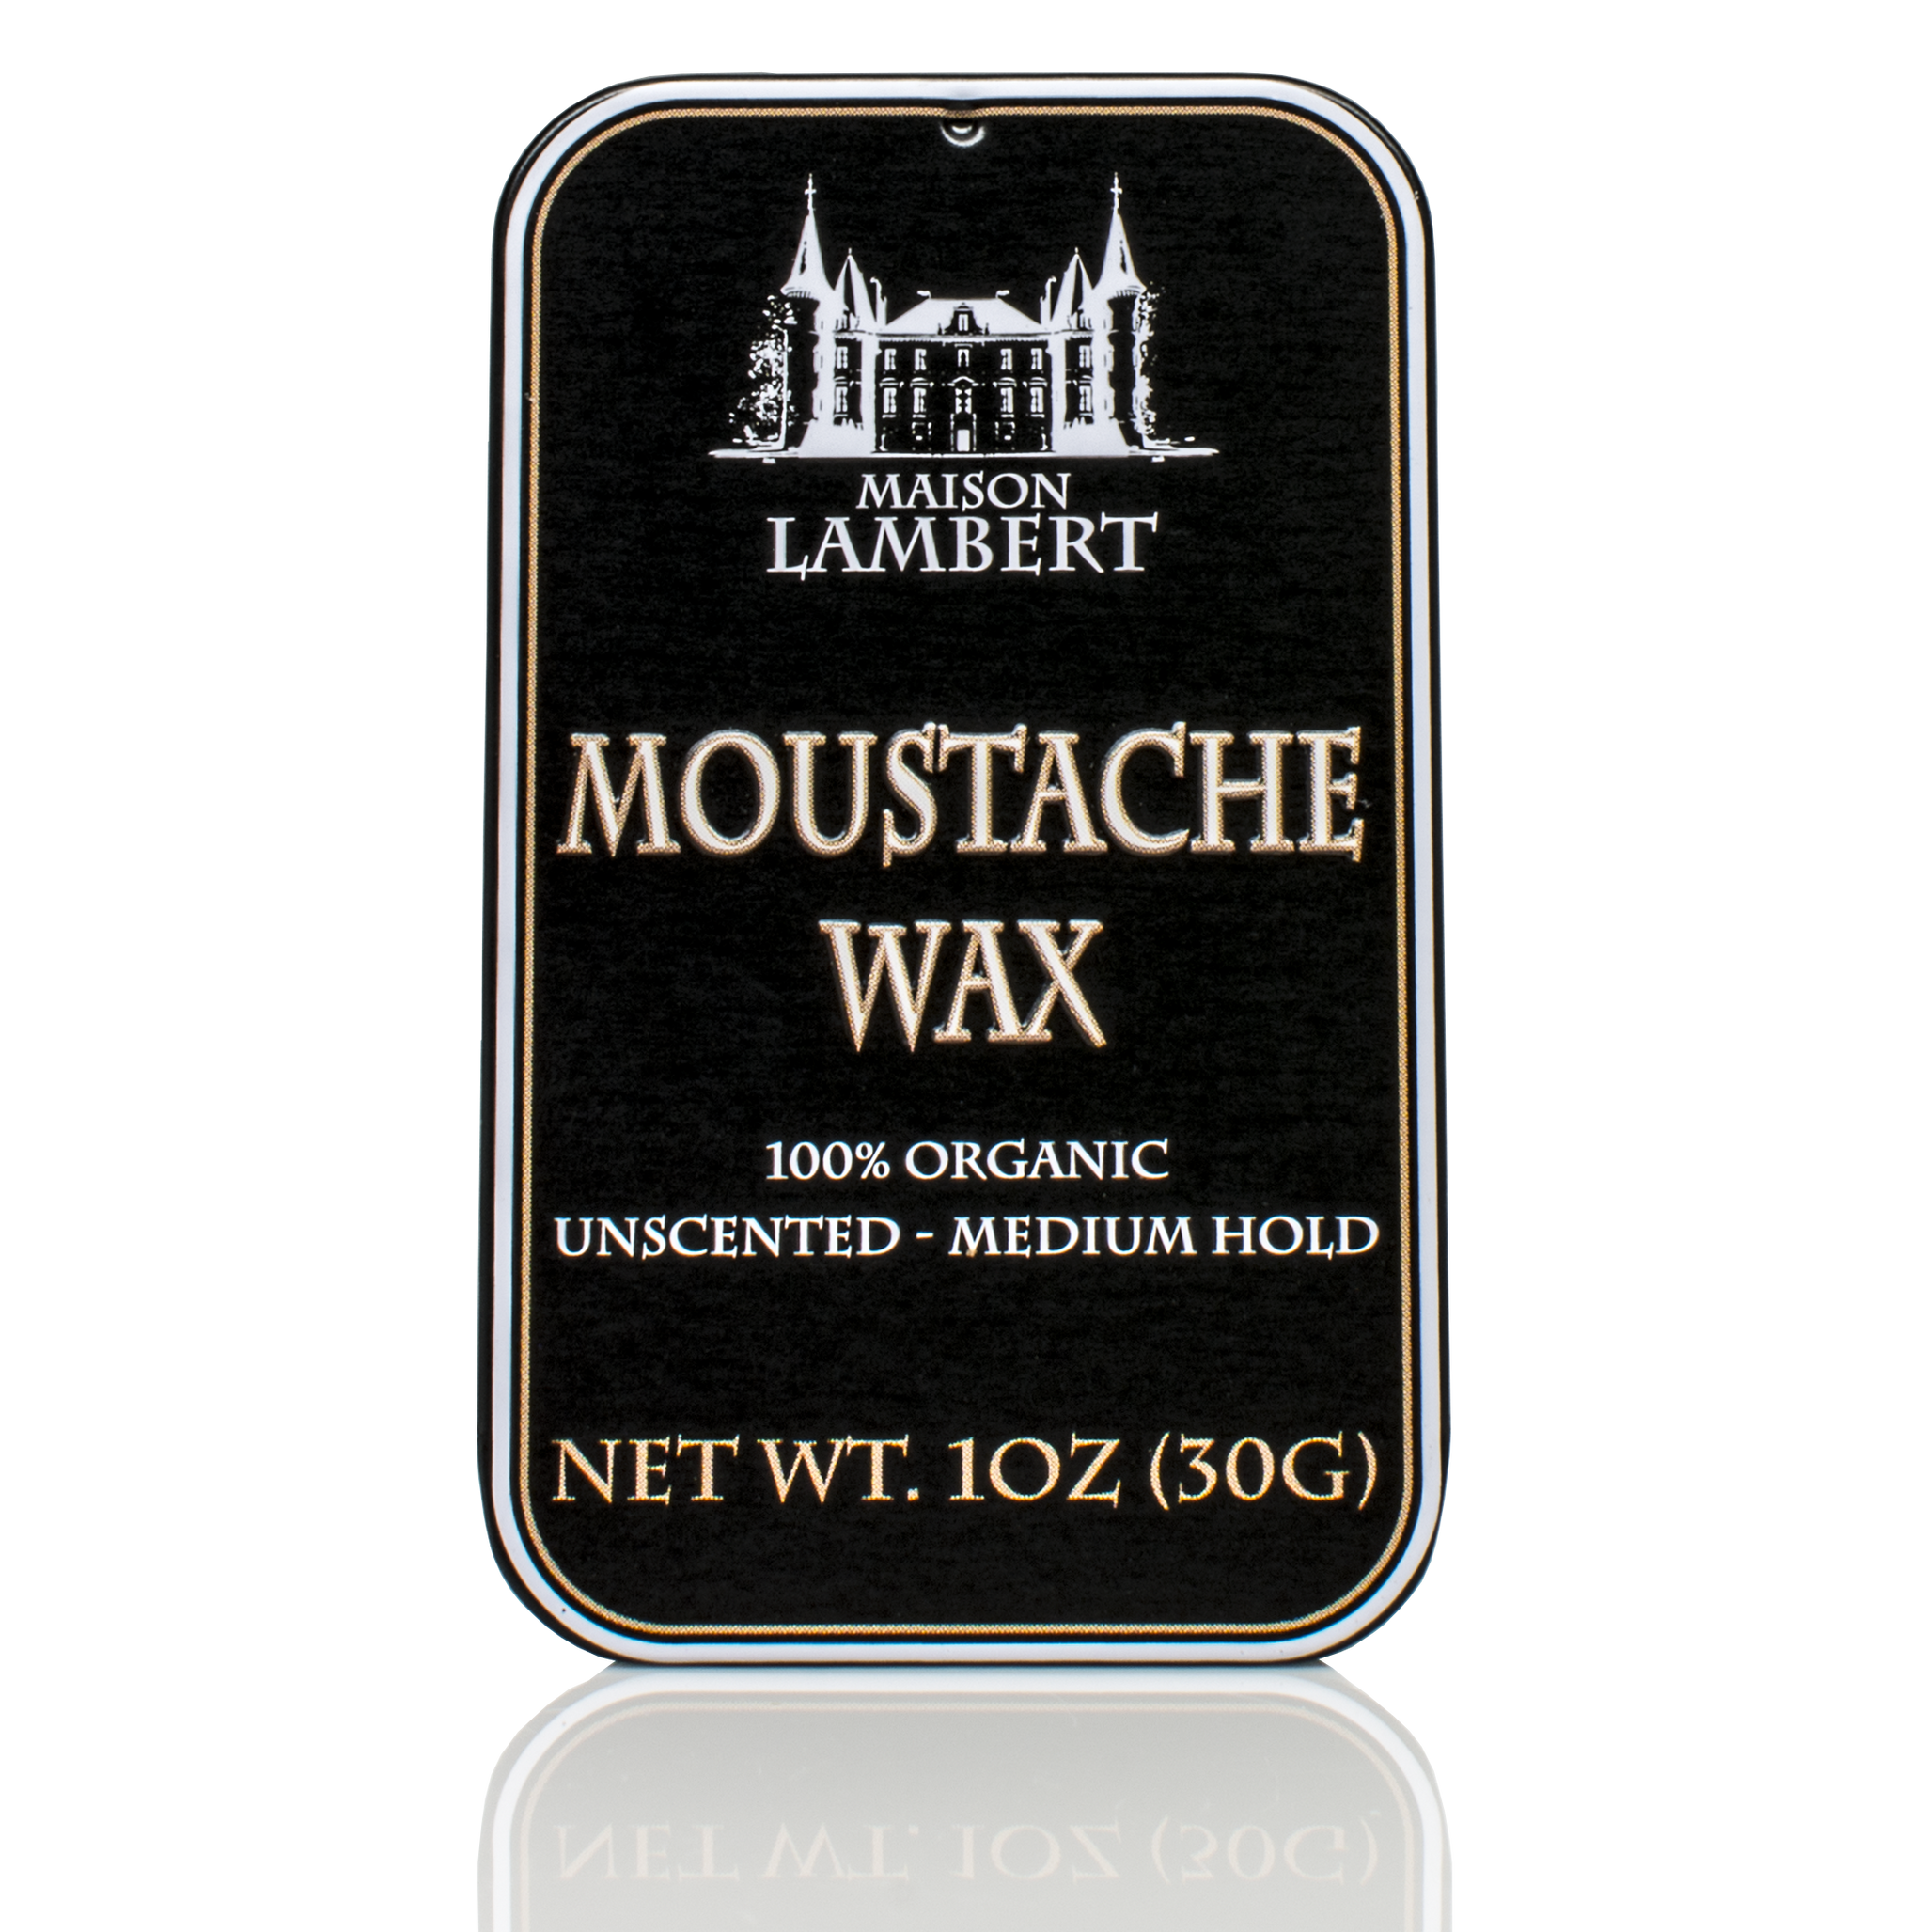 Maison Lambert Mustache Wax Made Of 100% Organic Ingredients - Best Moustache Wax For Long Lasting Hold While Treating Your Facial Hair!